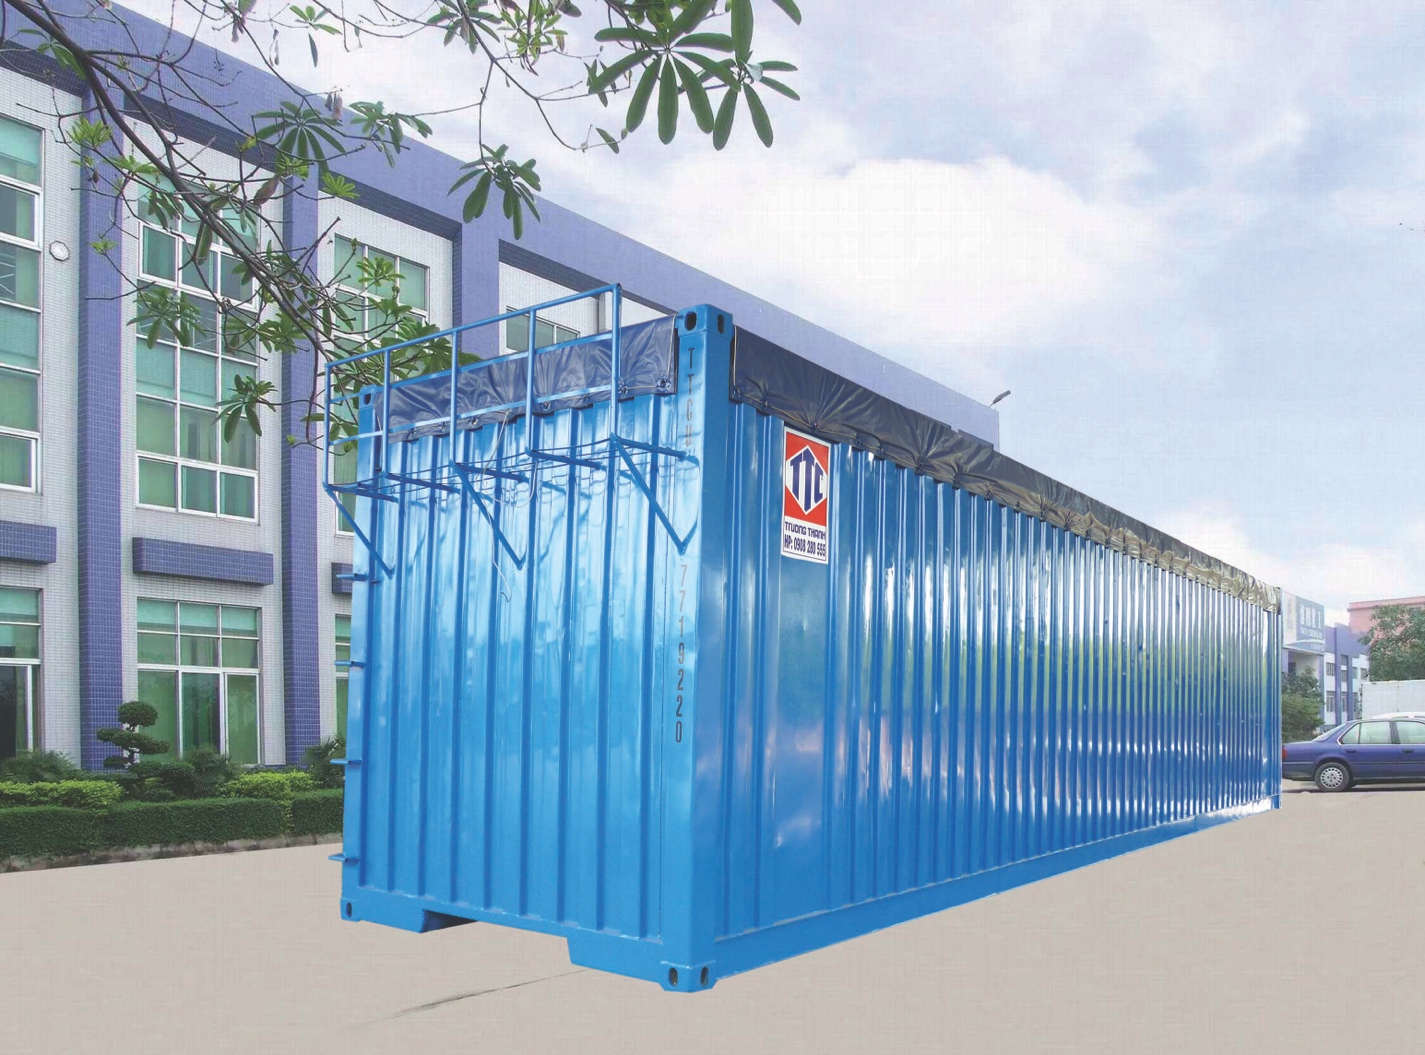 container mở nóc